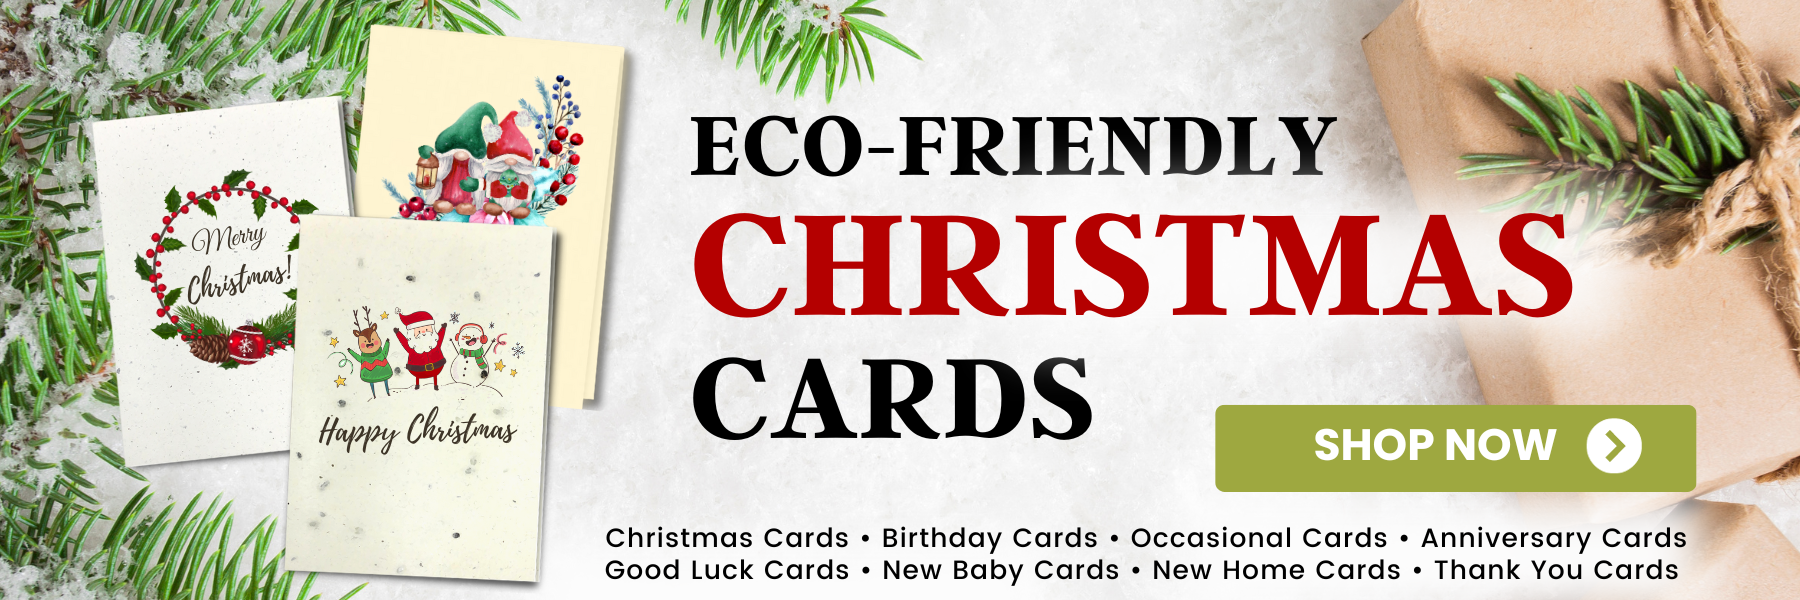 Earthbits Christmas Cards eco friendly made of seeded paper, coffee paper, elephant poo paper, tea paper, lemongrass paper, cotton paper